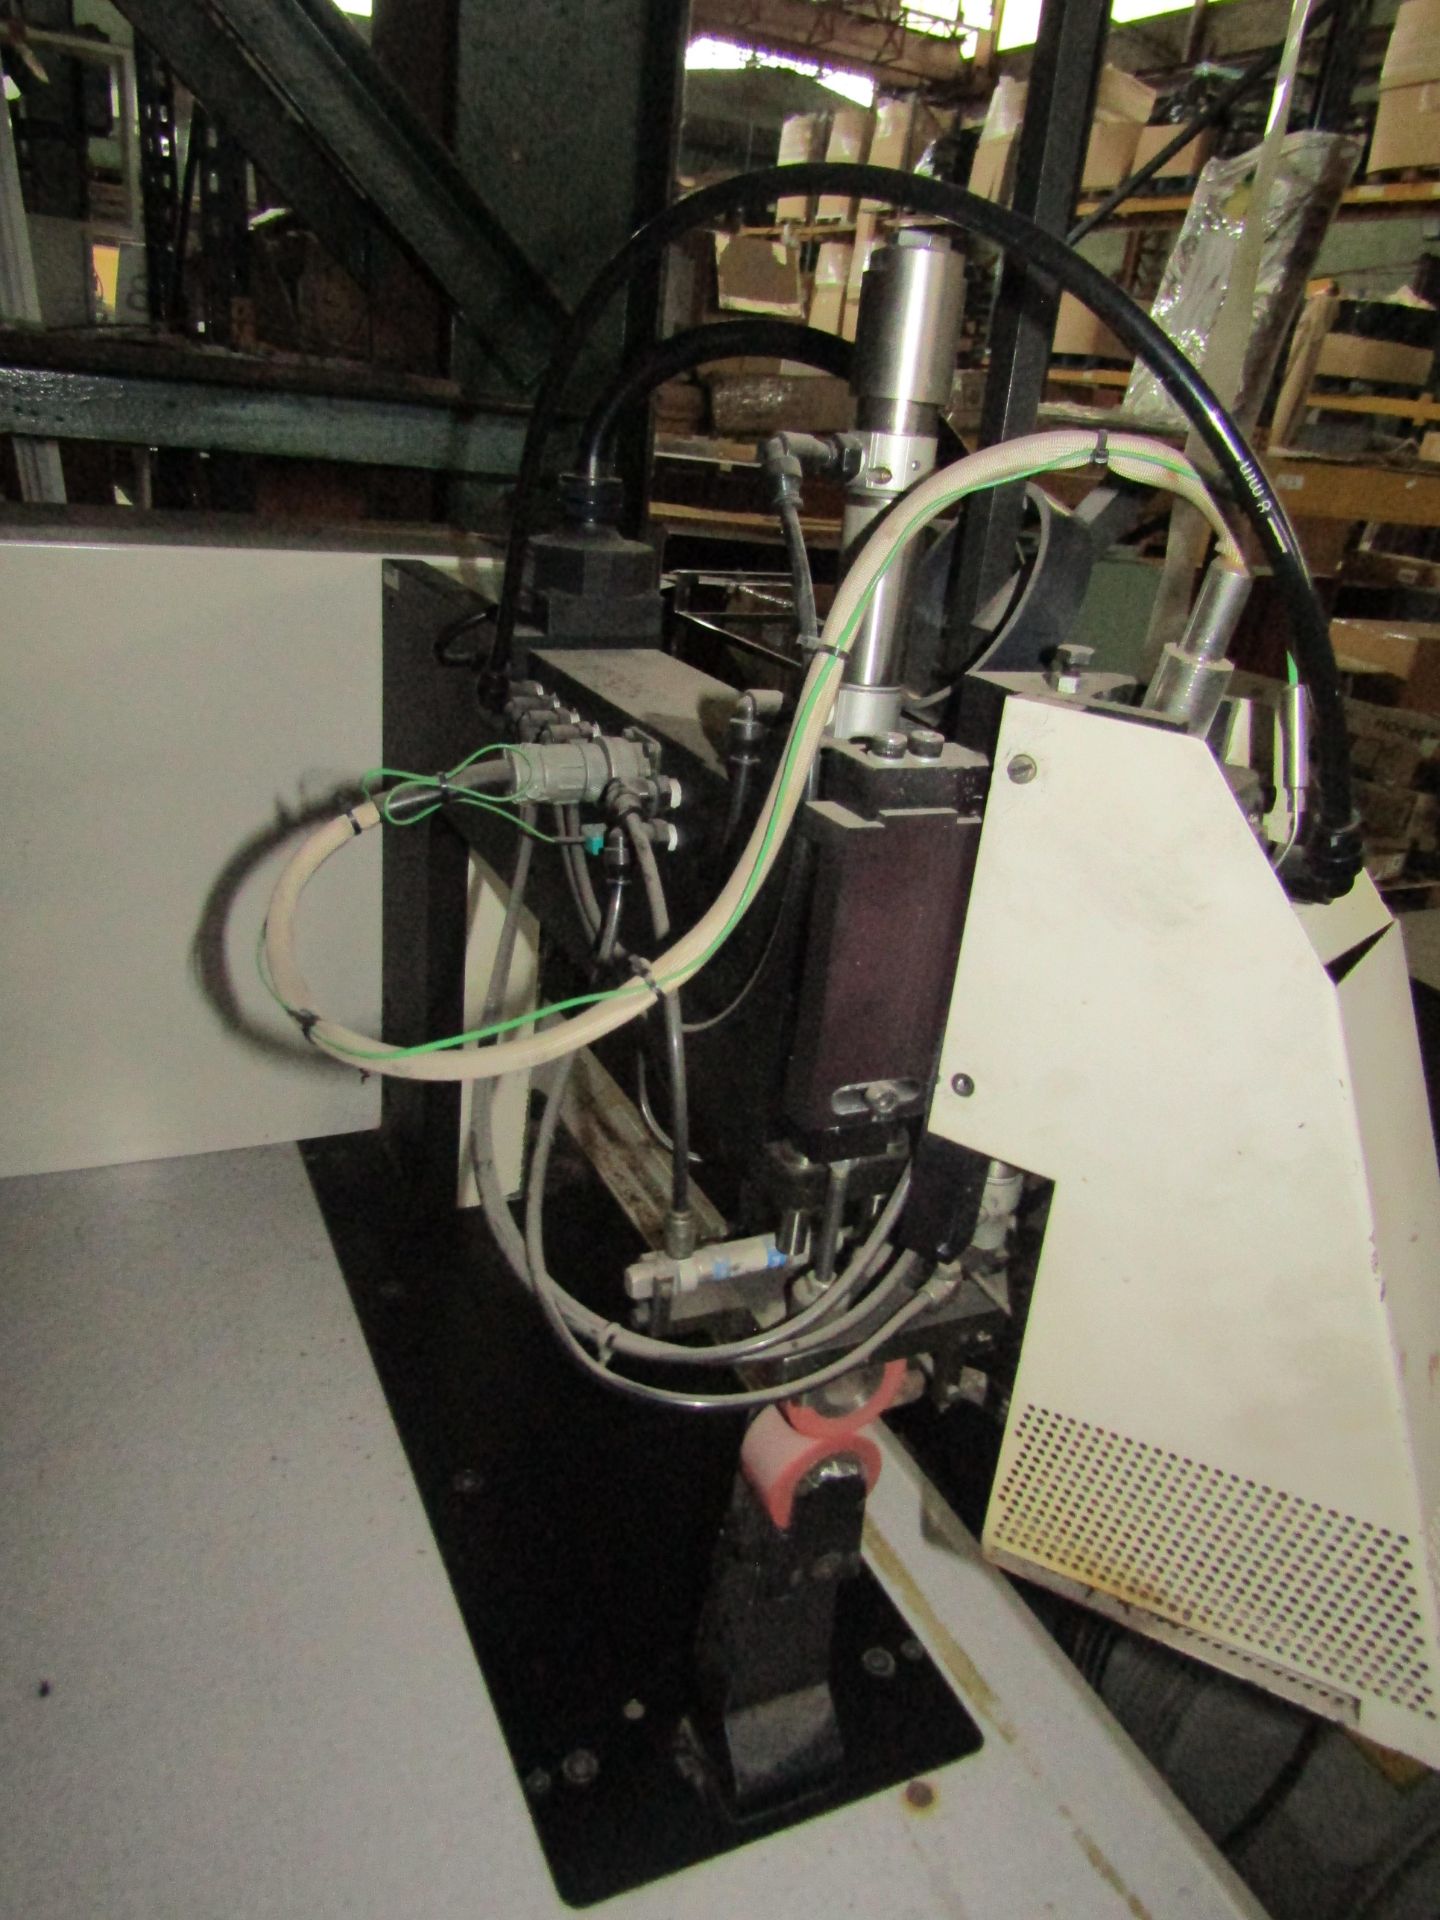 Ardmel tape seam sealer machine with Hydrovane 501 compressor. the business it was removed from says - Image 6 of 6